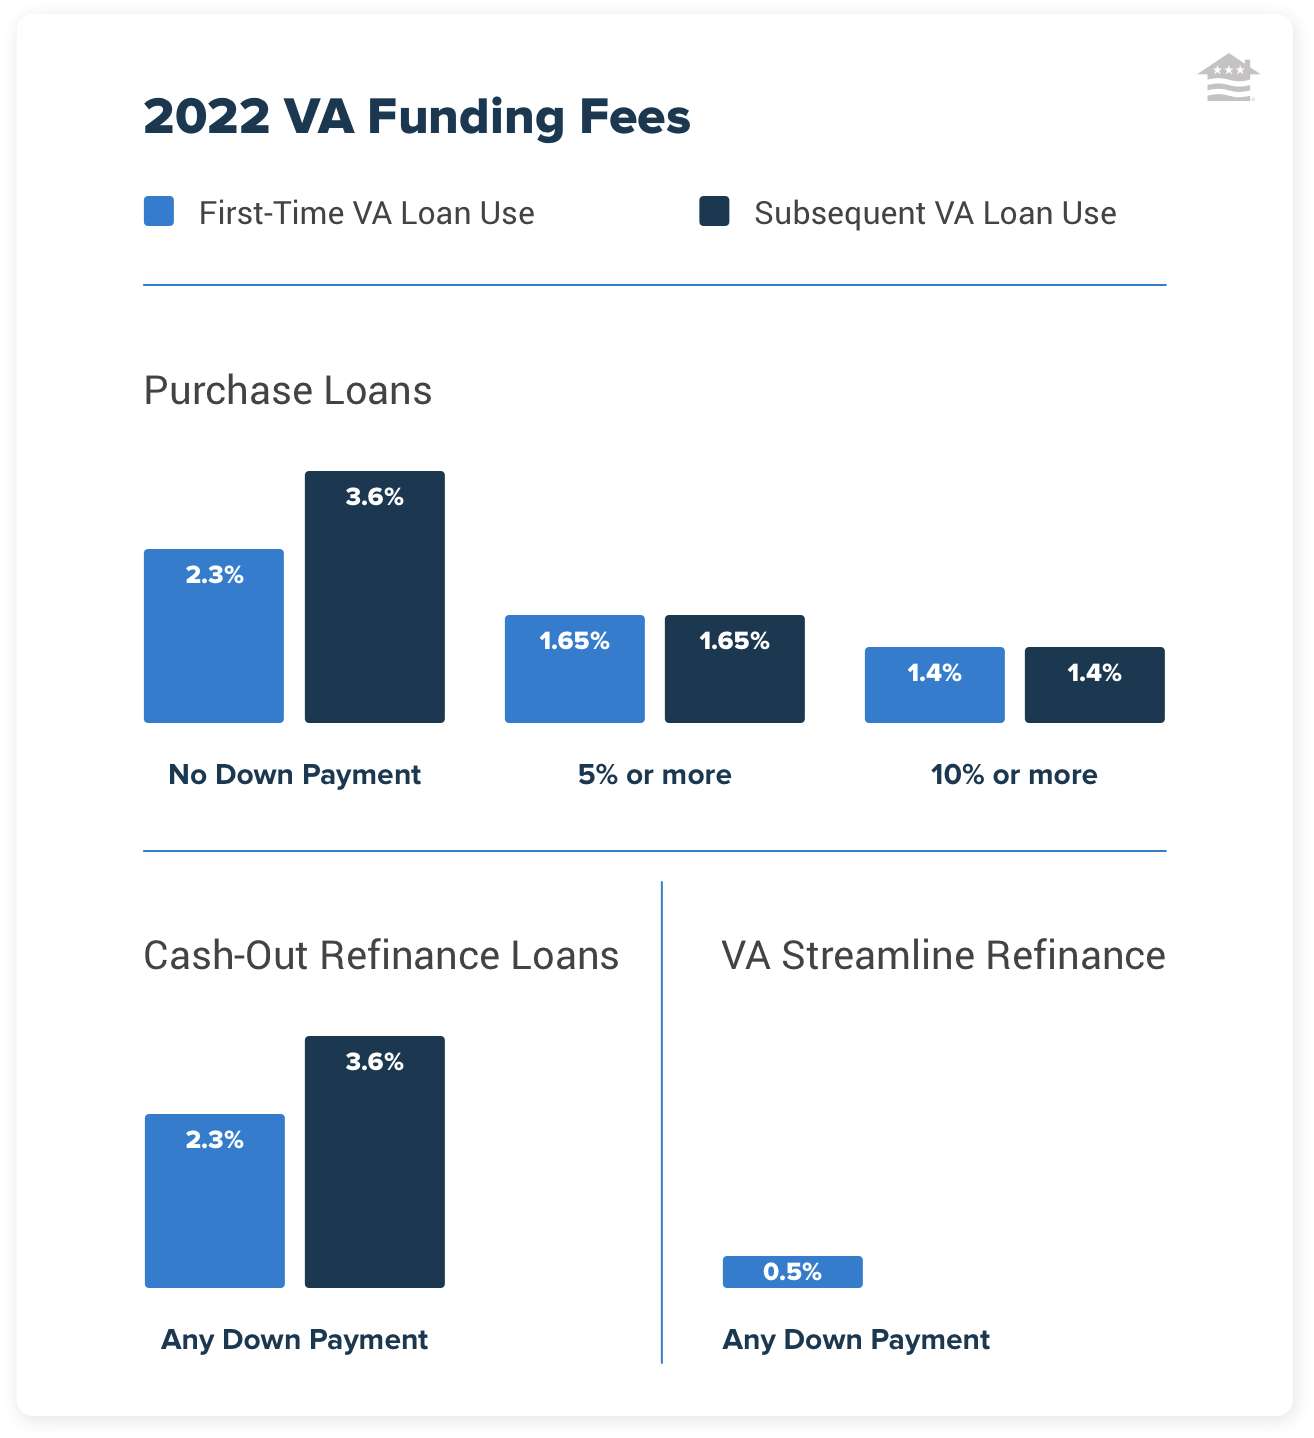 A chart showing 2022 VA funding fee amounts for first time and subsequent VA loan use. 